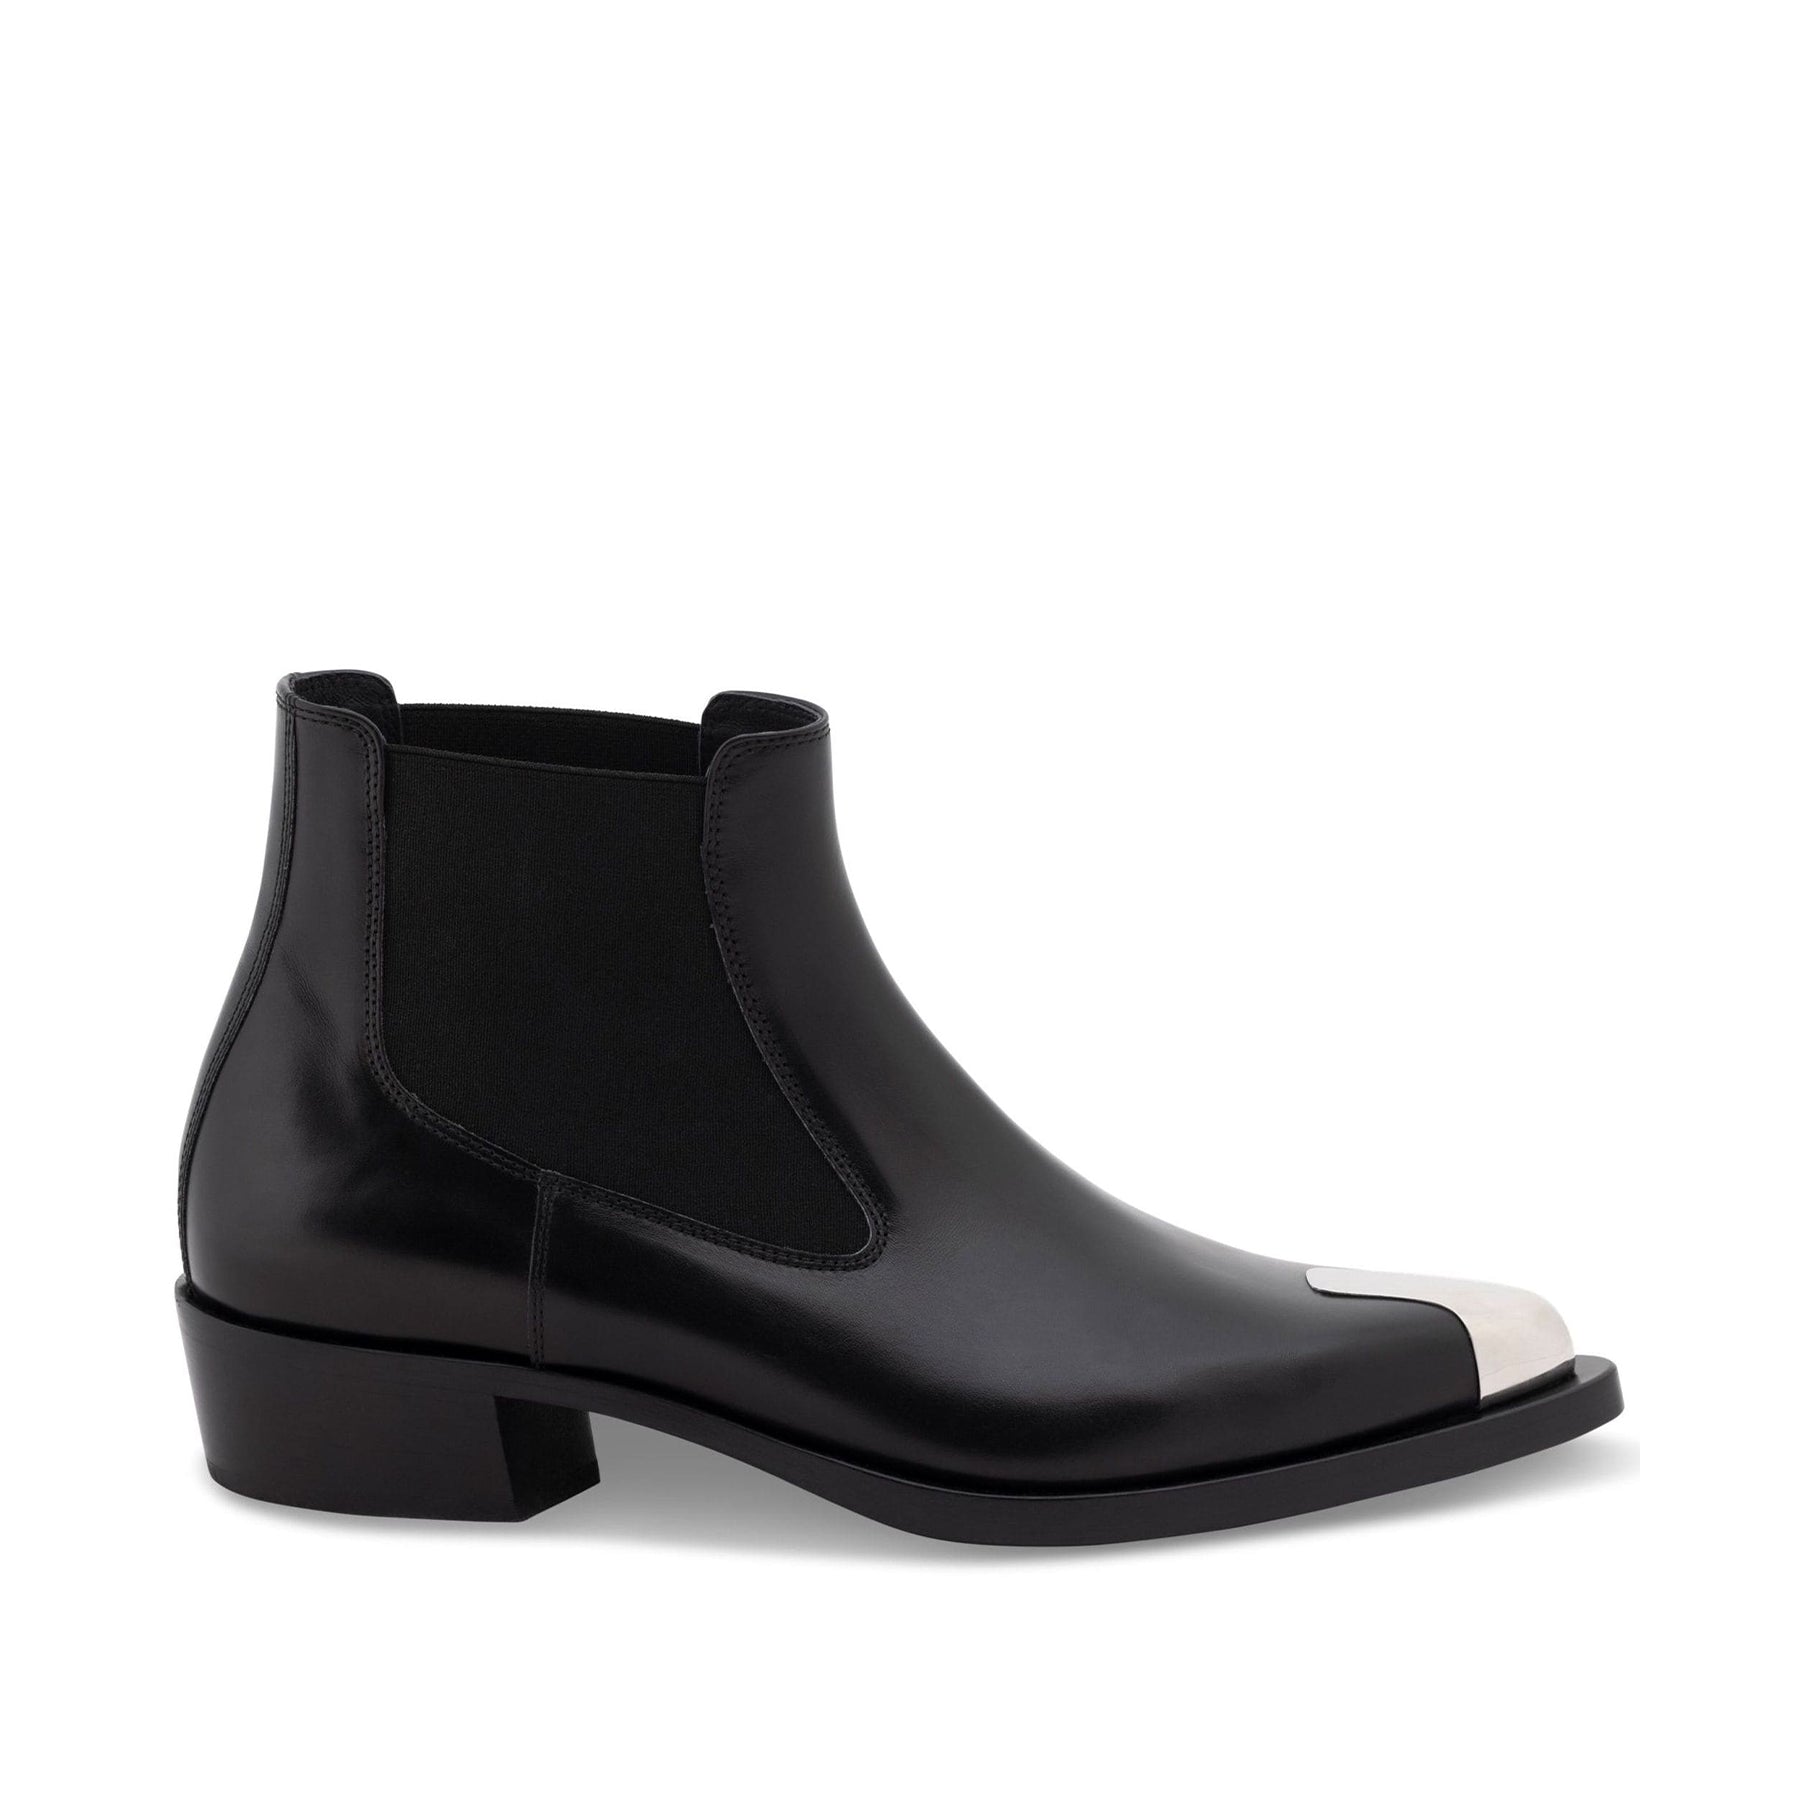 Punk Chelsea leather boots